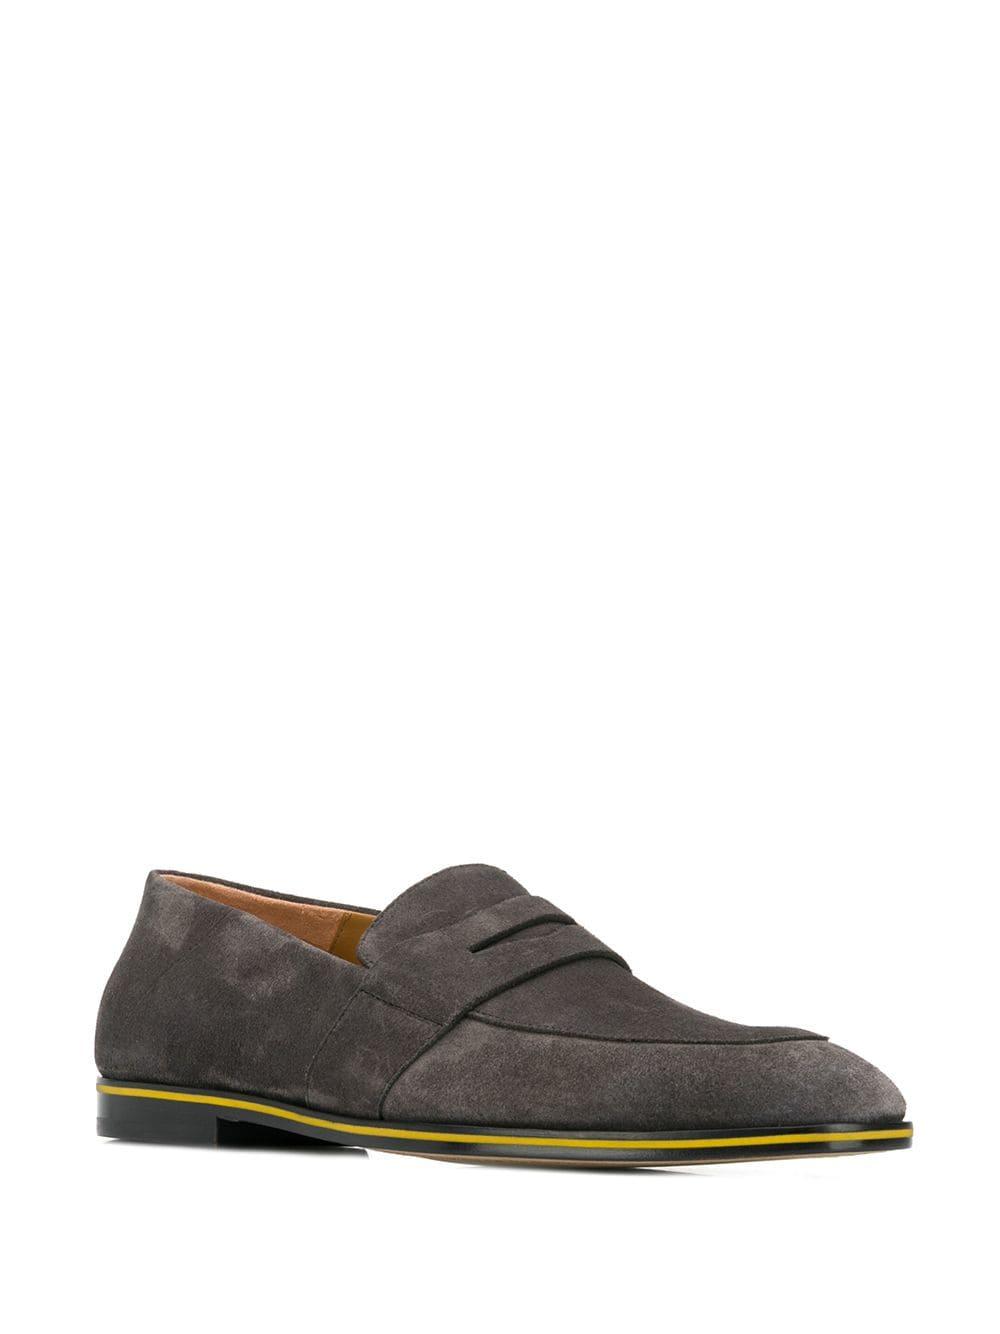 BOSS Penny Loafers in Gray for Men - Lyst